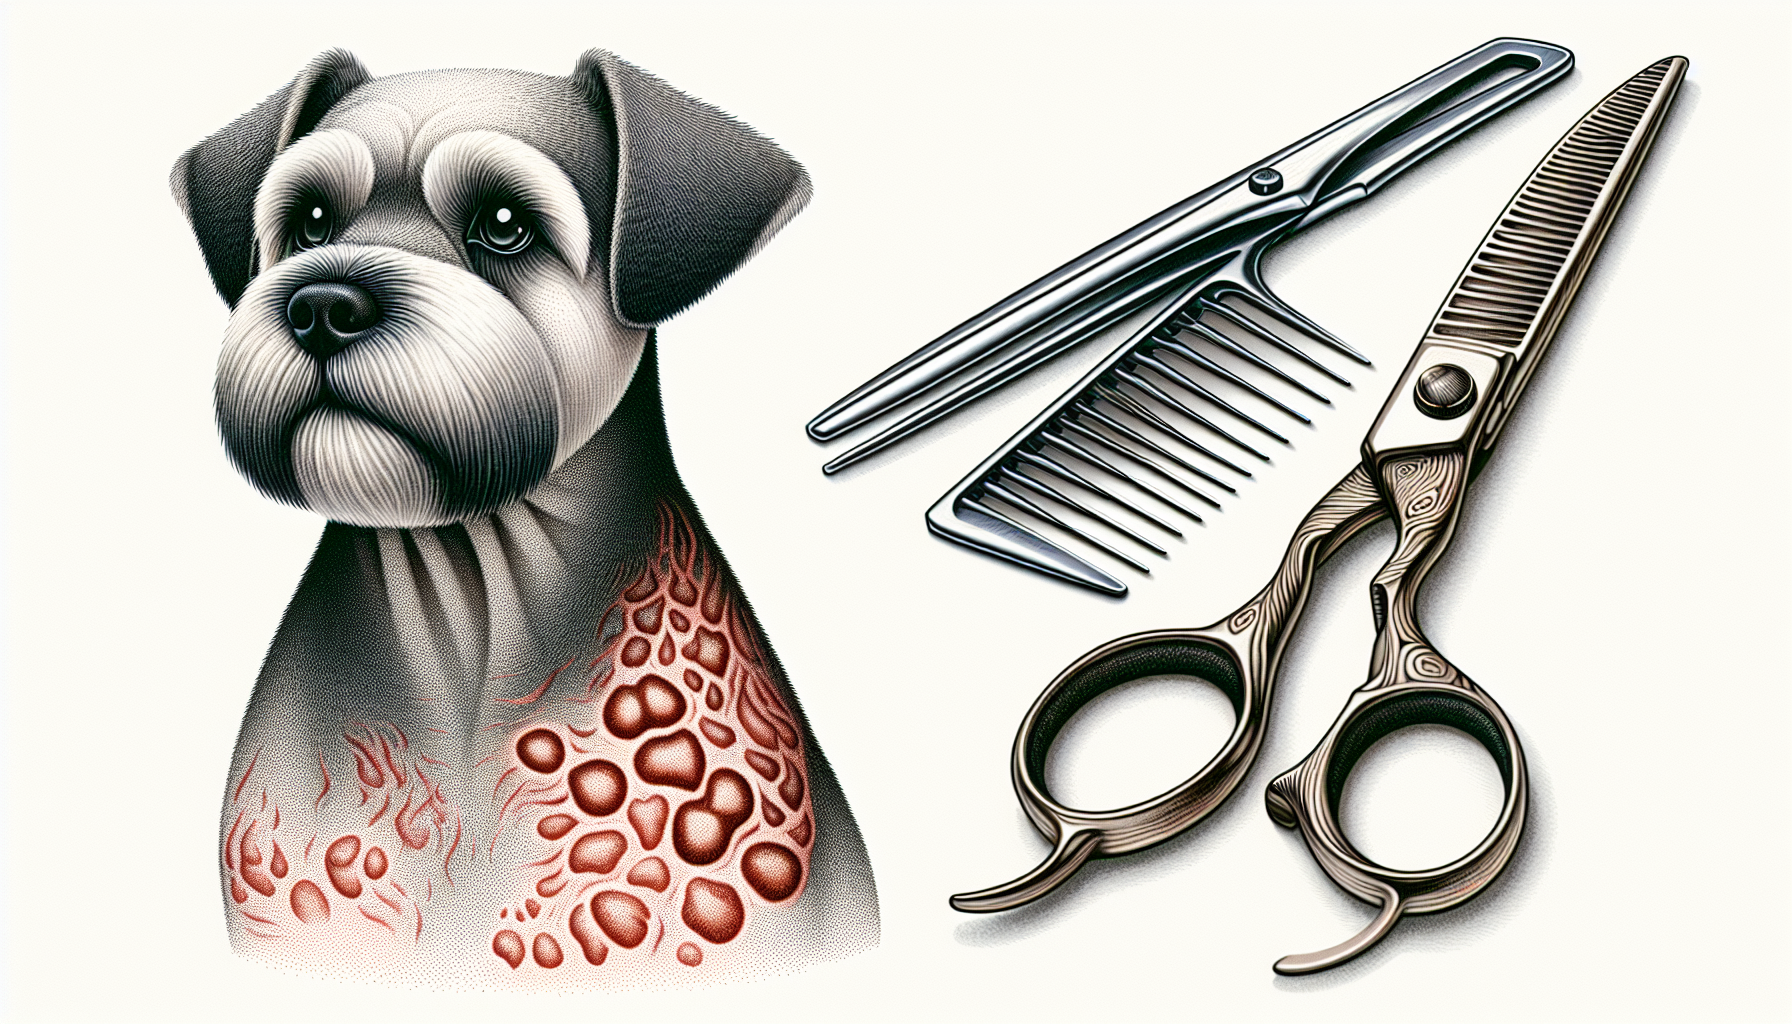 Illustration of using human scissors on dogs leading to uneven cuts